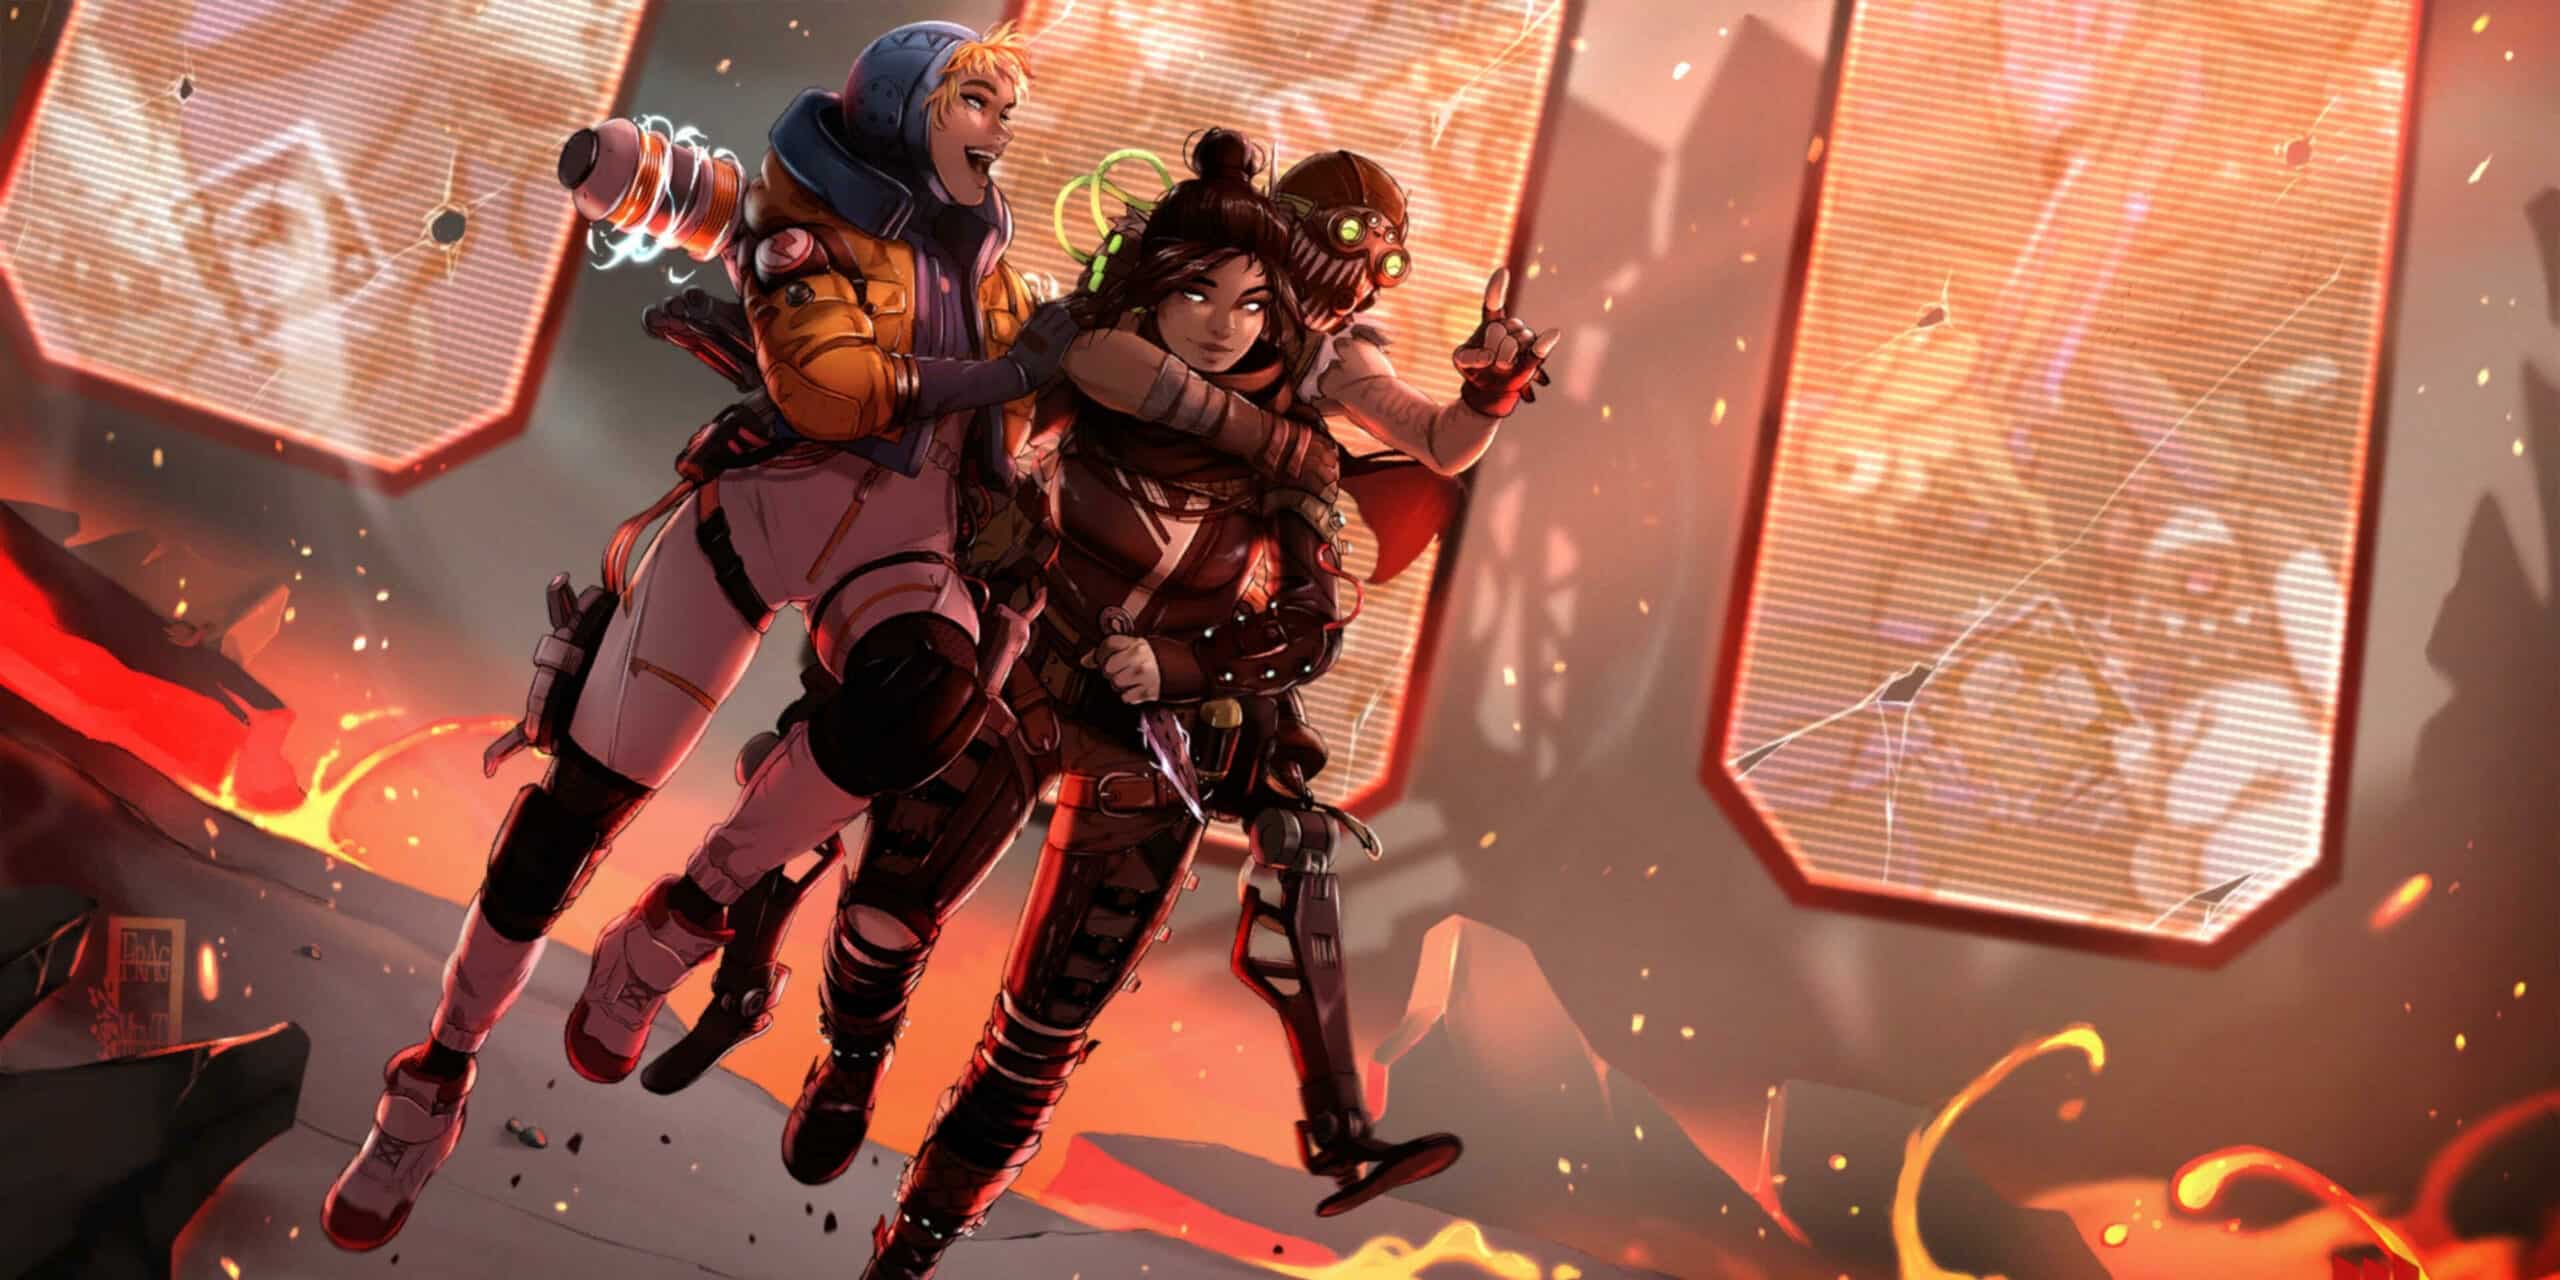 Could Apex Legends Overtake Warzone 2 as Preferred Battle Royale For Streamers?